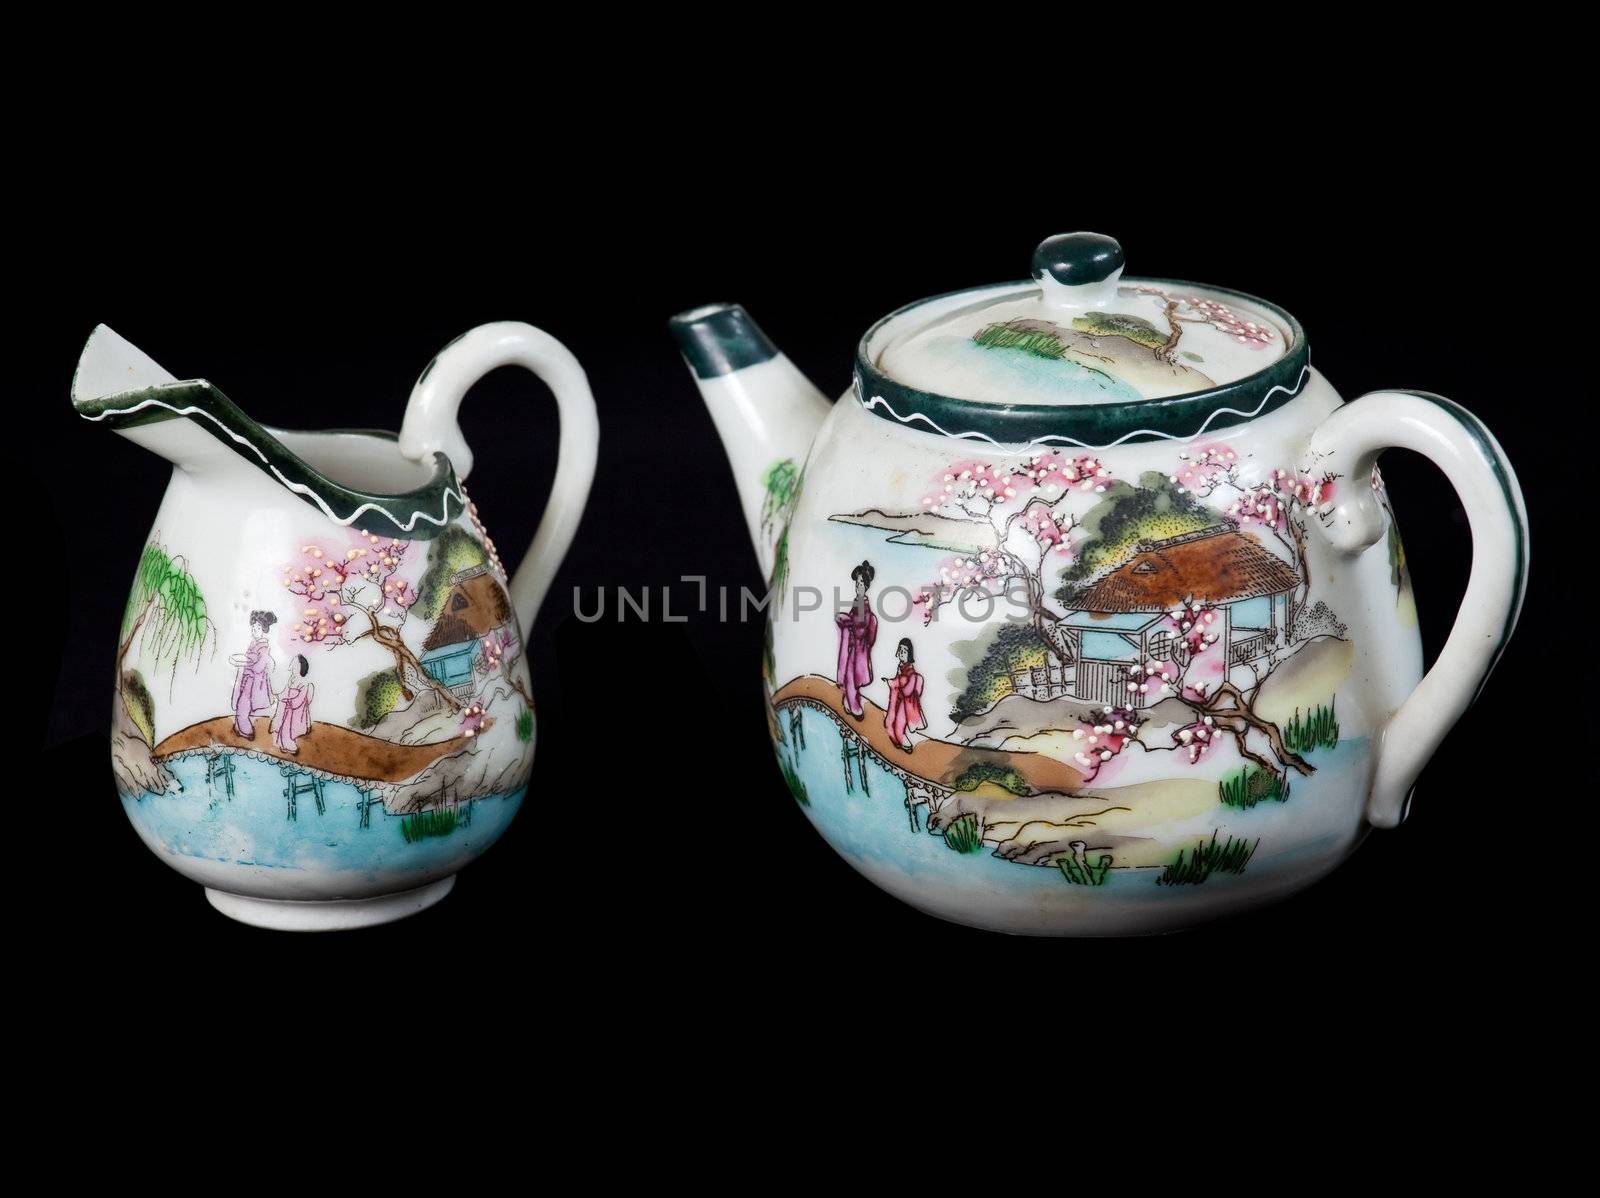 Old chinese decorated teapot and milk jug in traditional style isolated against black